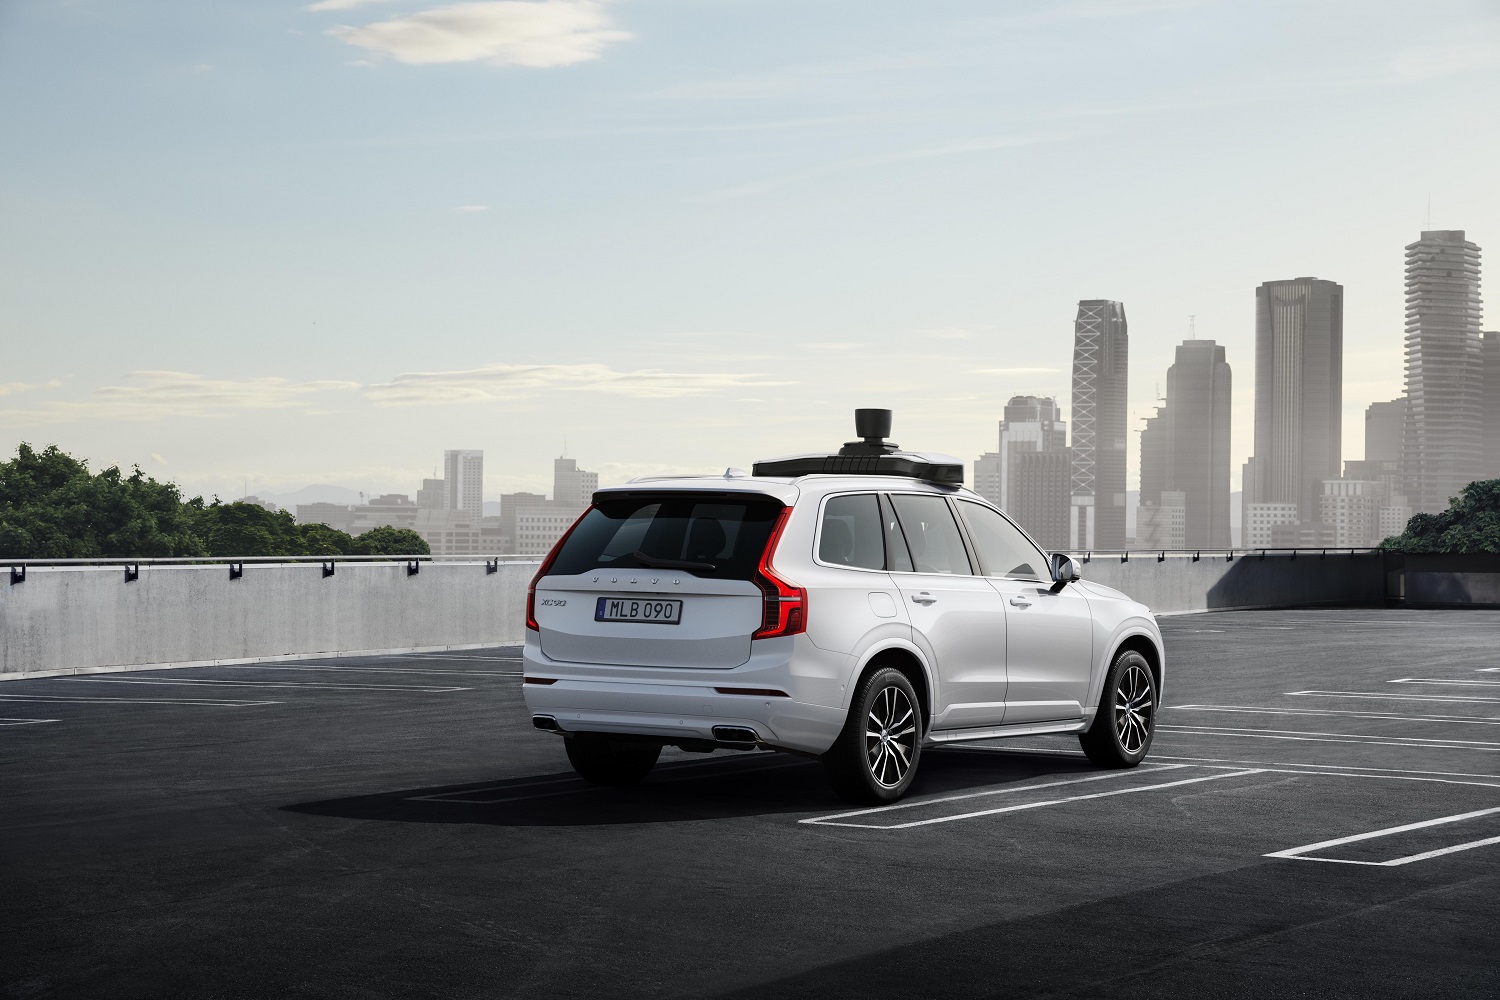 volvo uber unveil xc90 based self driving car prototype cars and present production vehicle ready for